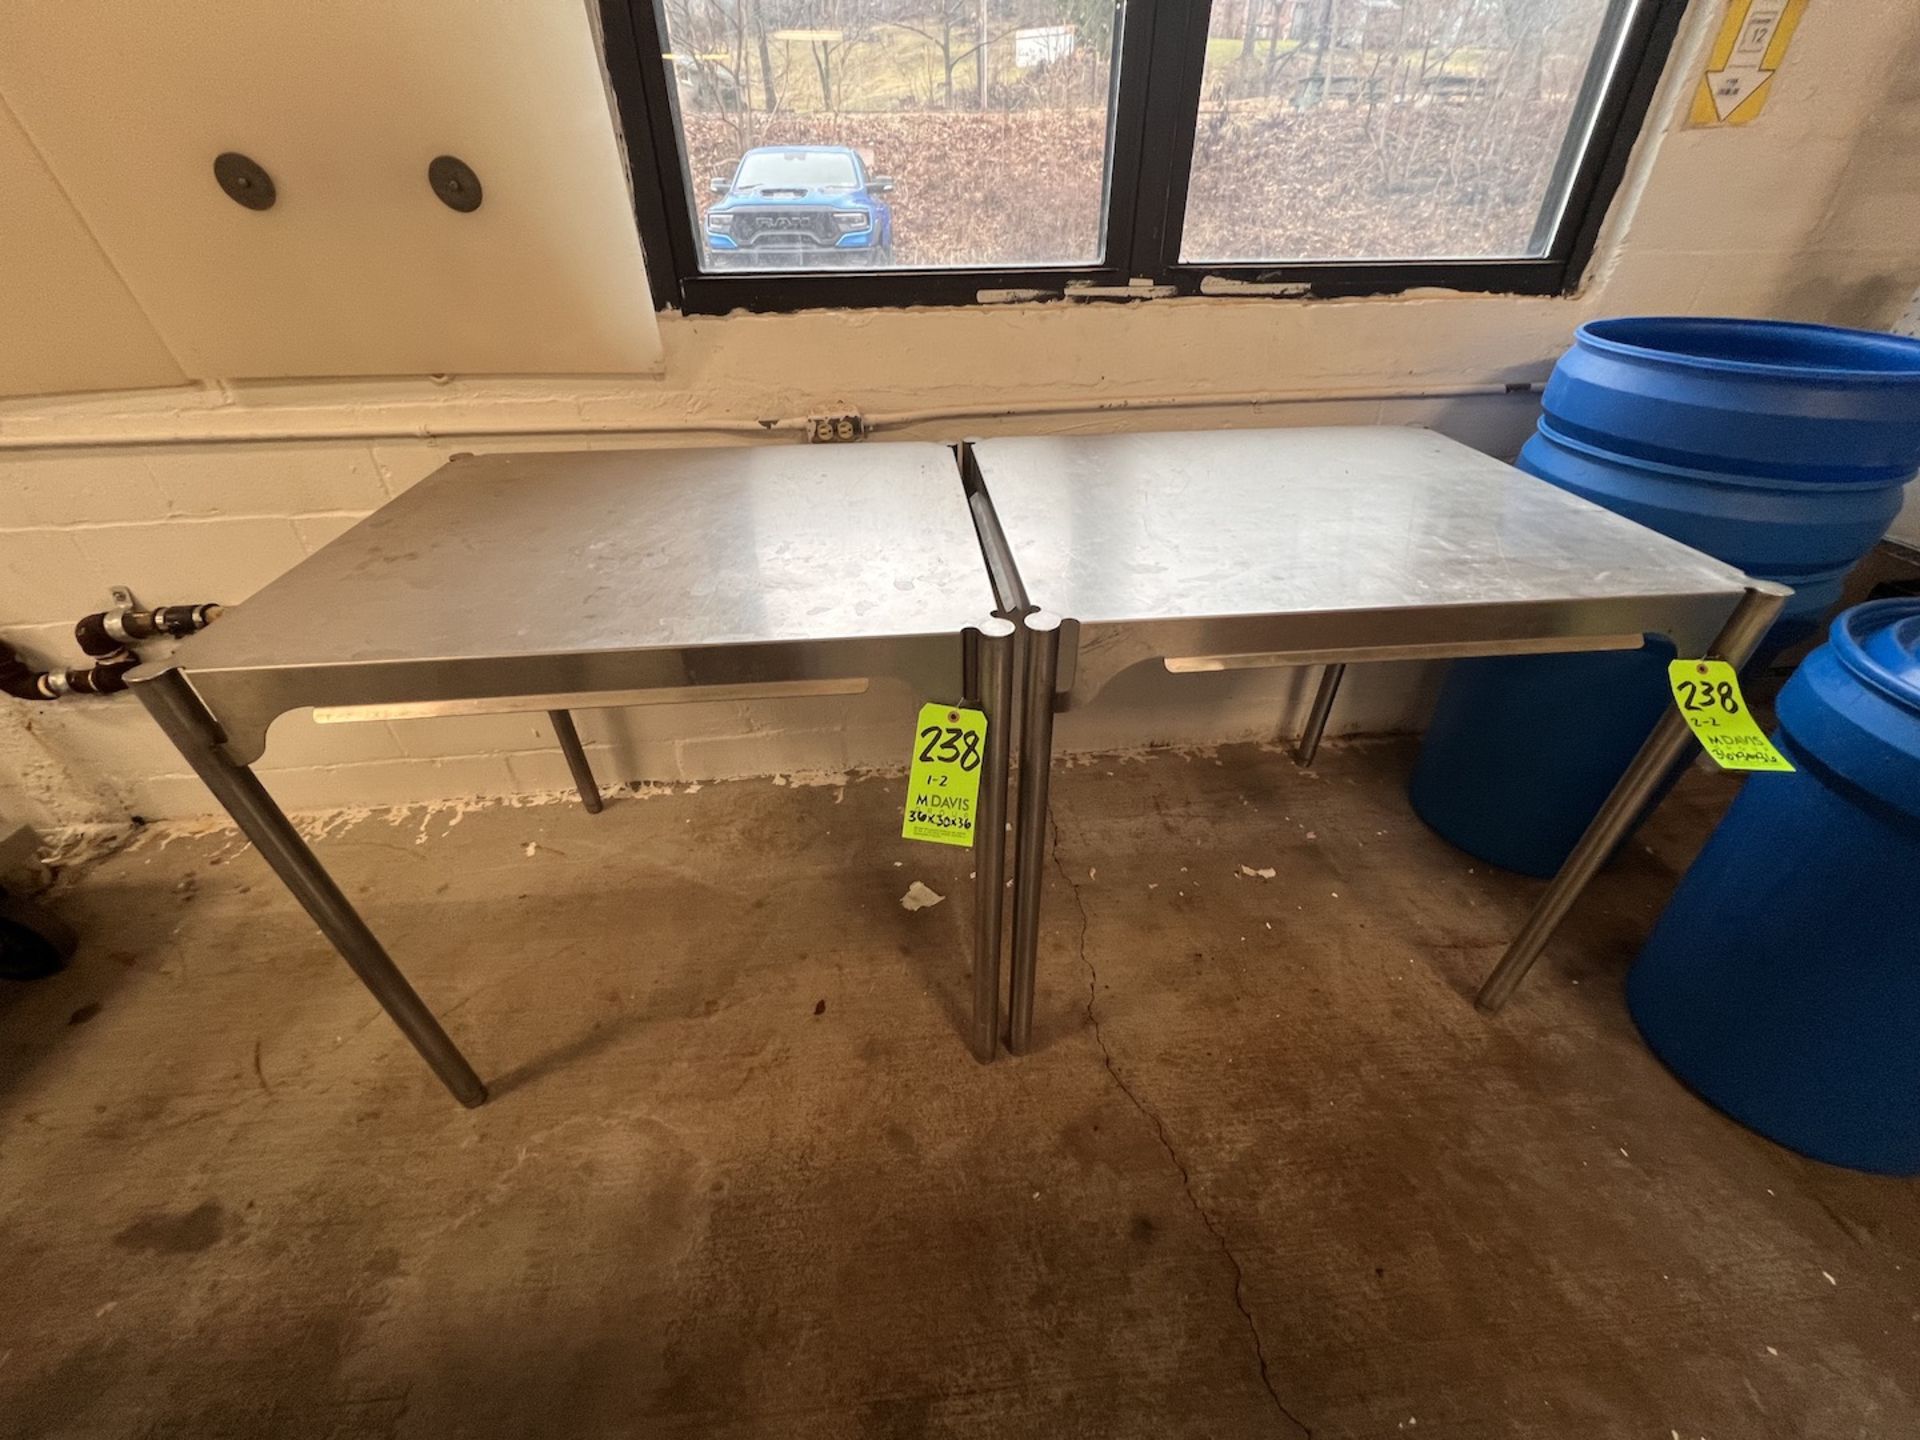 (2) S/S TABLES, APPROX. 36 IN. L X 30 IN. W X 36 IN. H